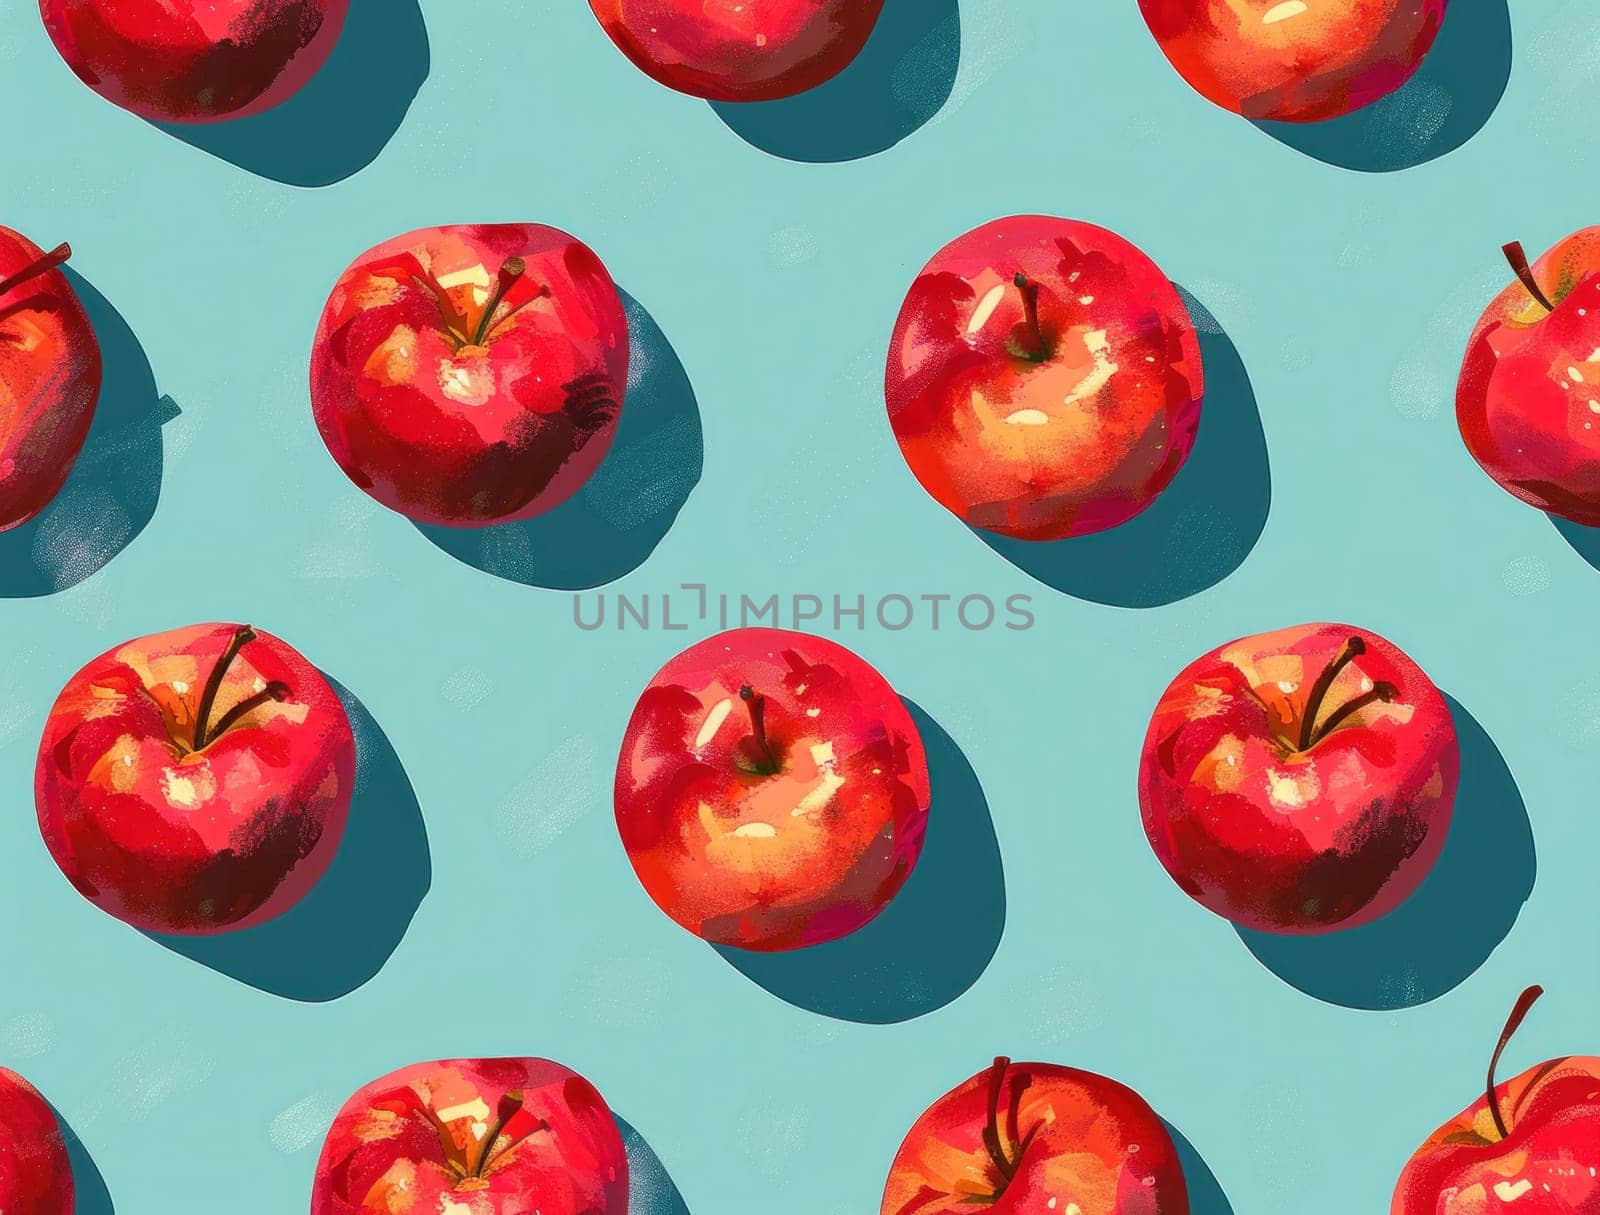 Red apples on blue background with shadows, fresh and vibrant fruit still life composition for healthy eating concept